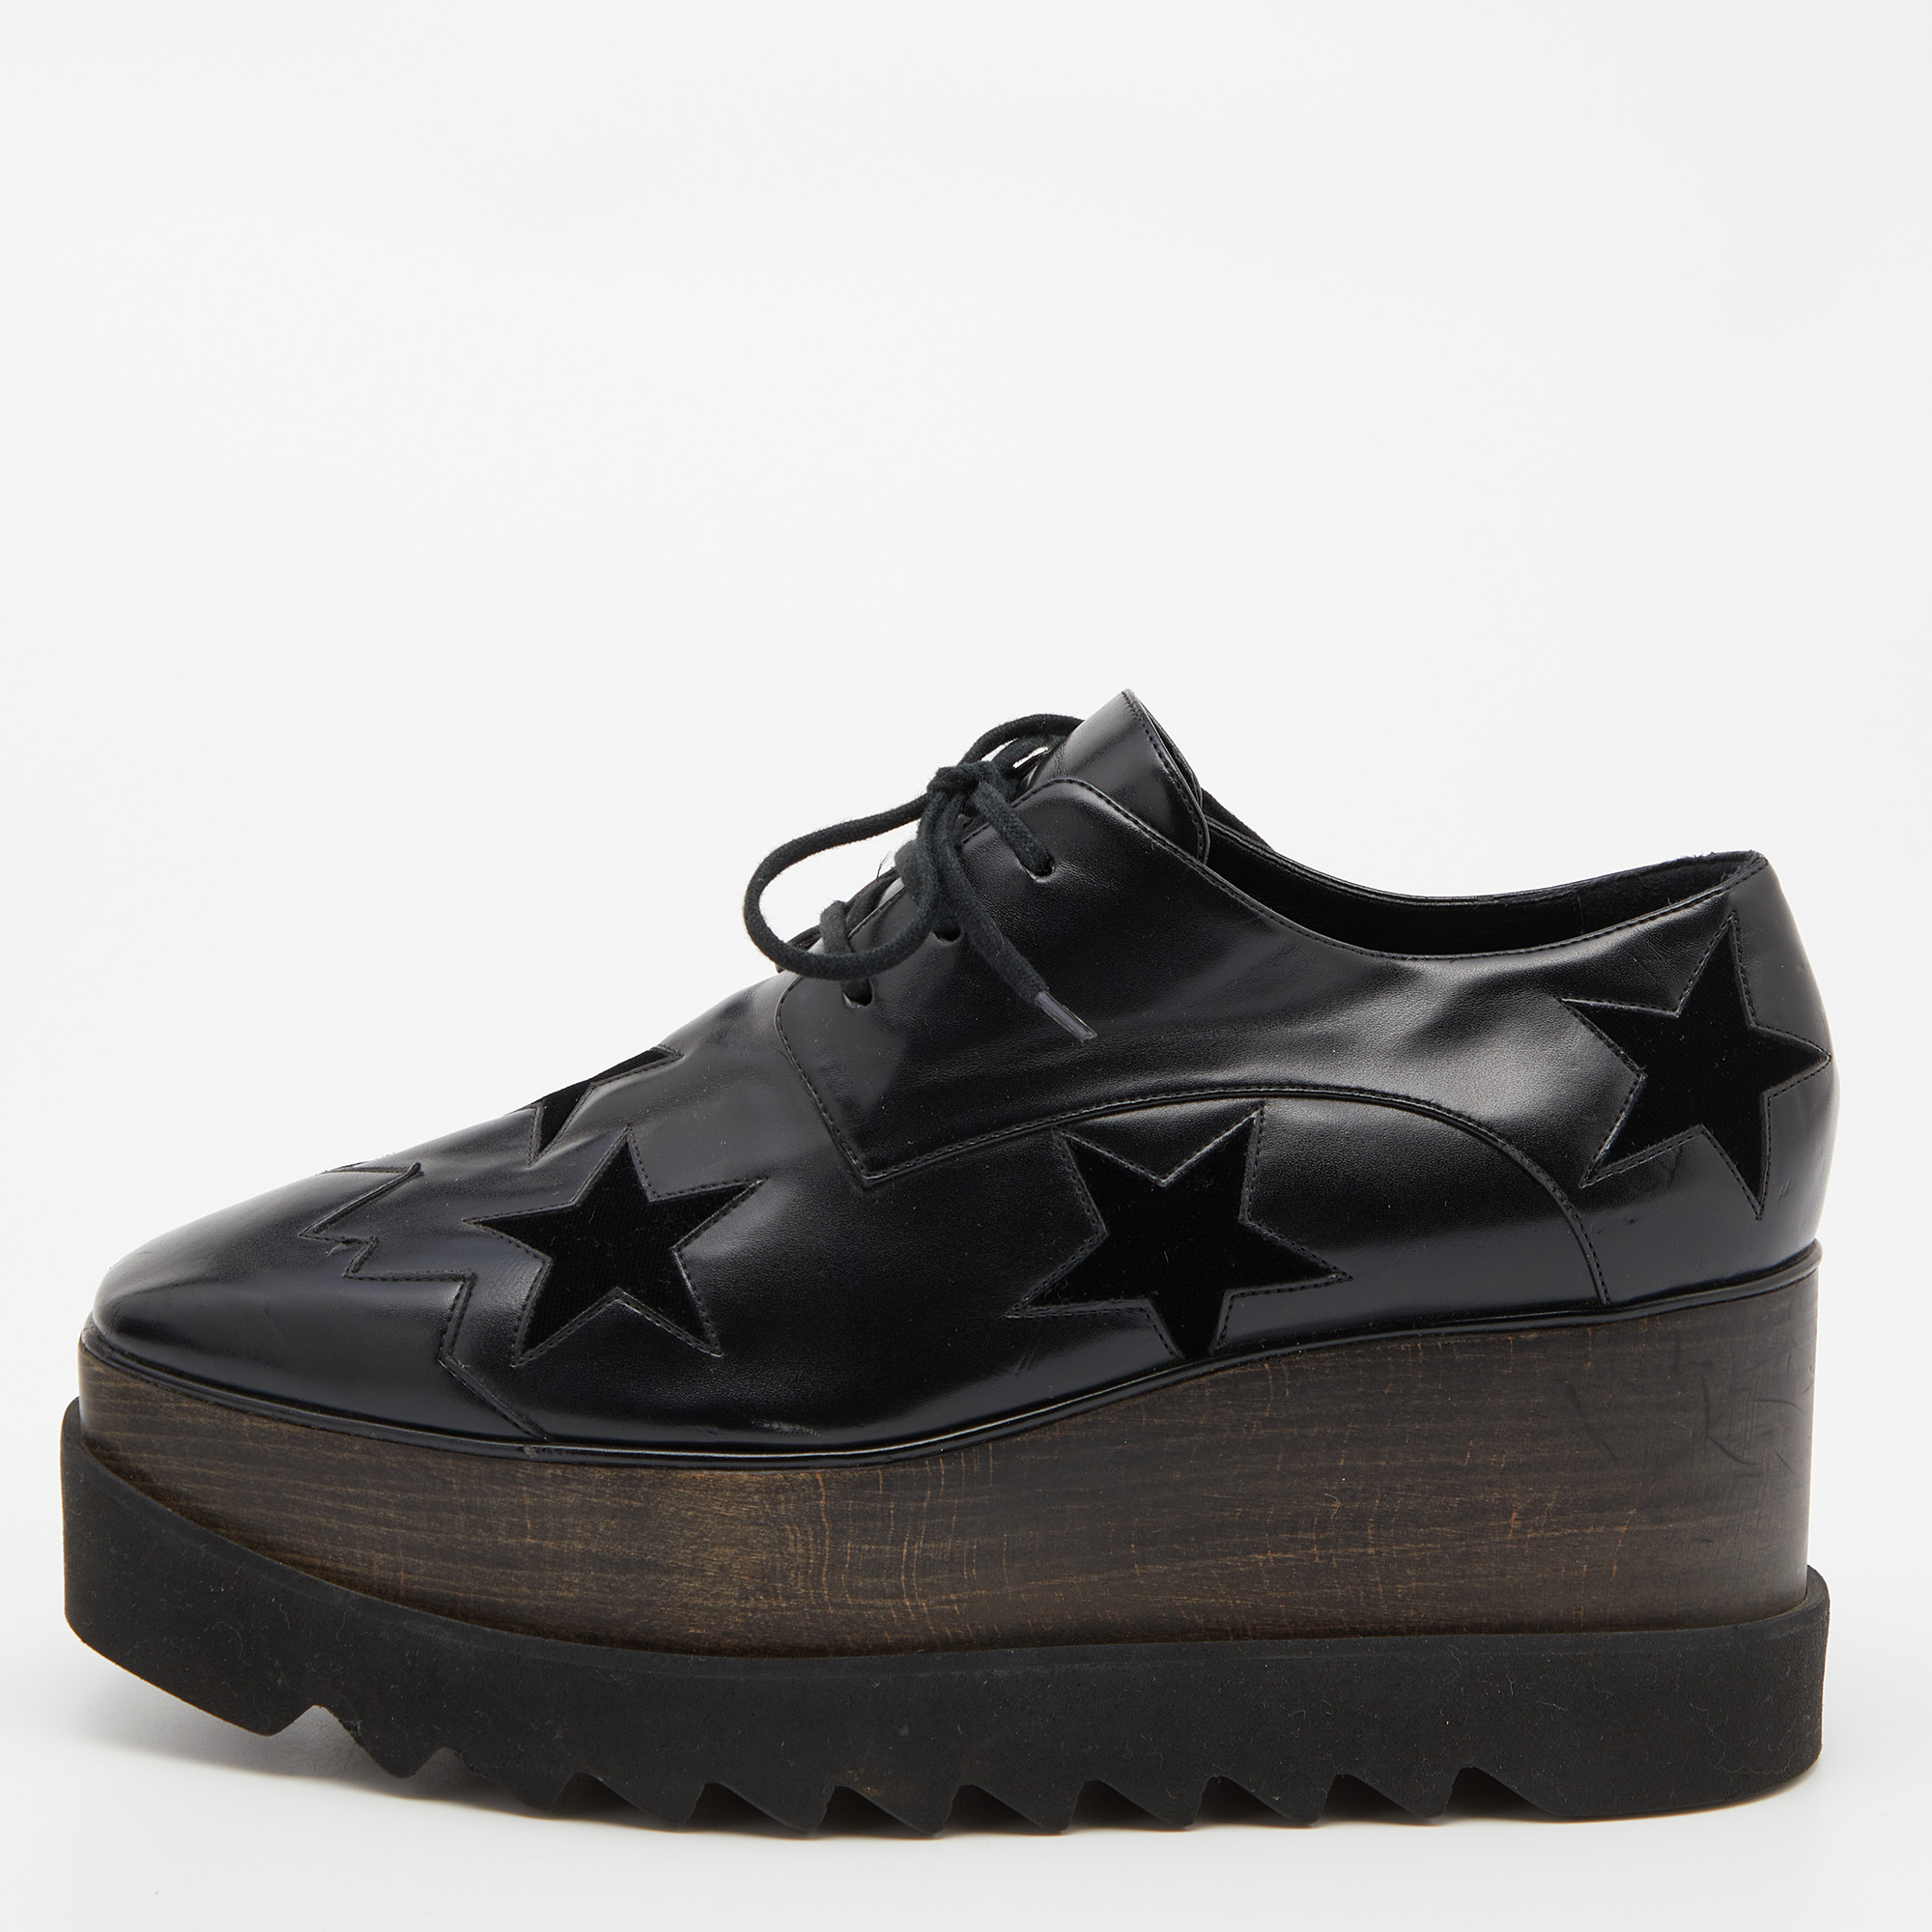 Add a statement appeal to your outfit with these sneakers. Made from premium materials they feature lace up vamps and relaxing footbeds. The rubber sole of this pair aims to provide you with everyday ease.